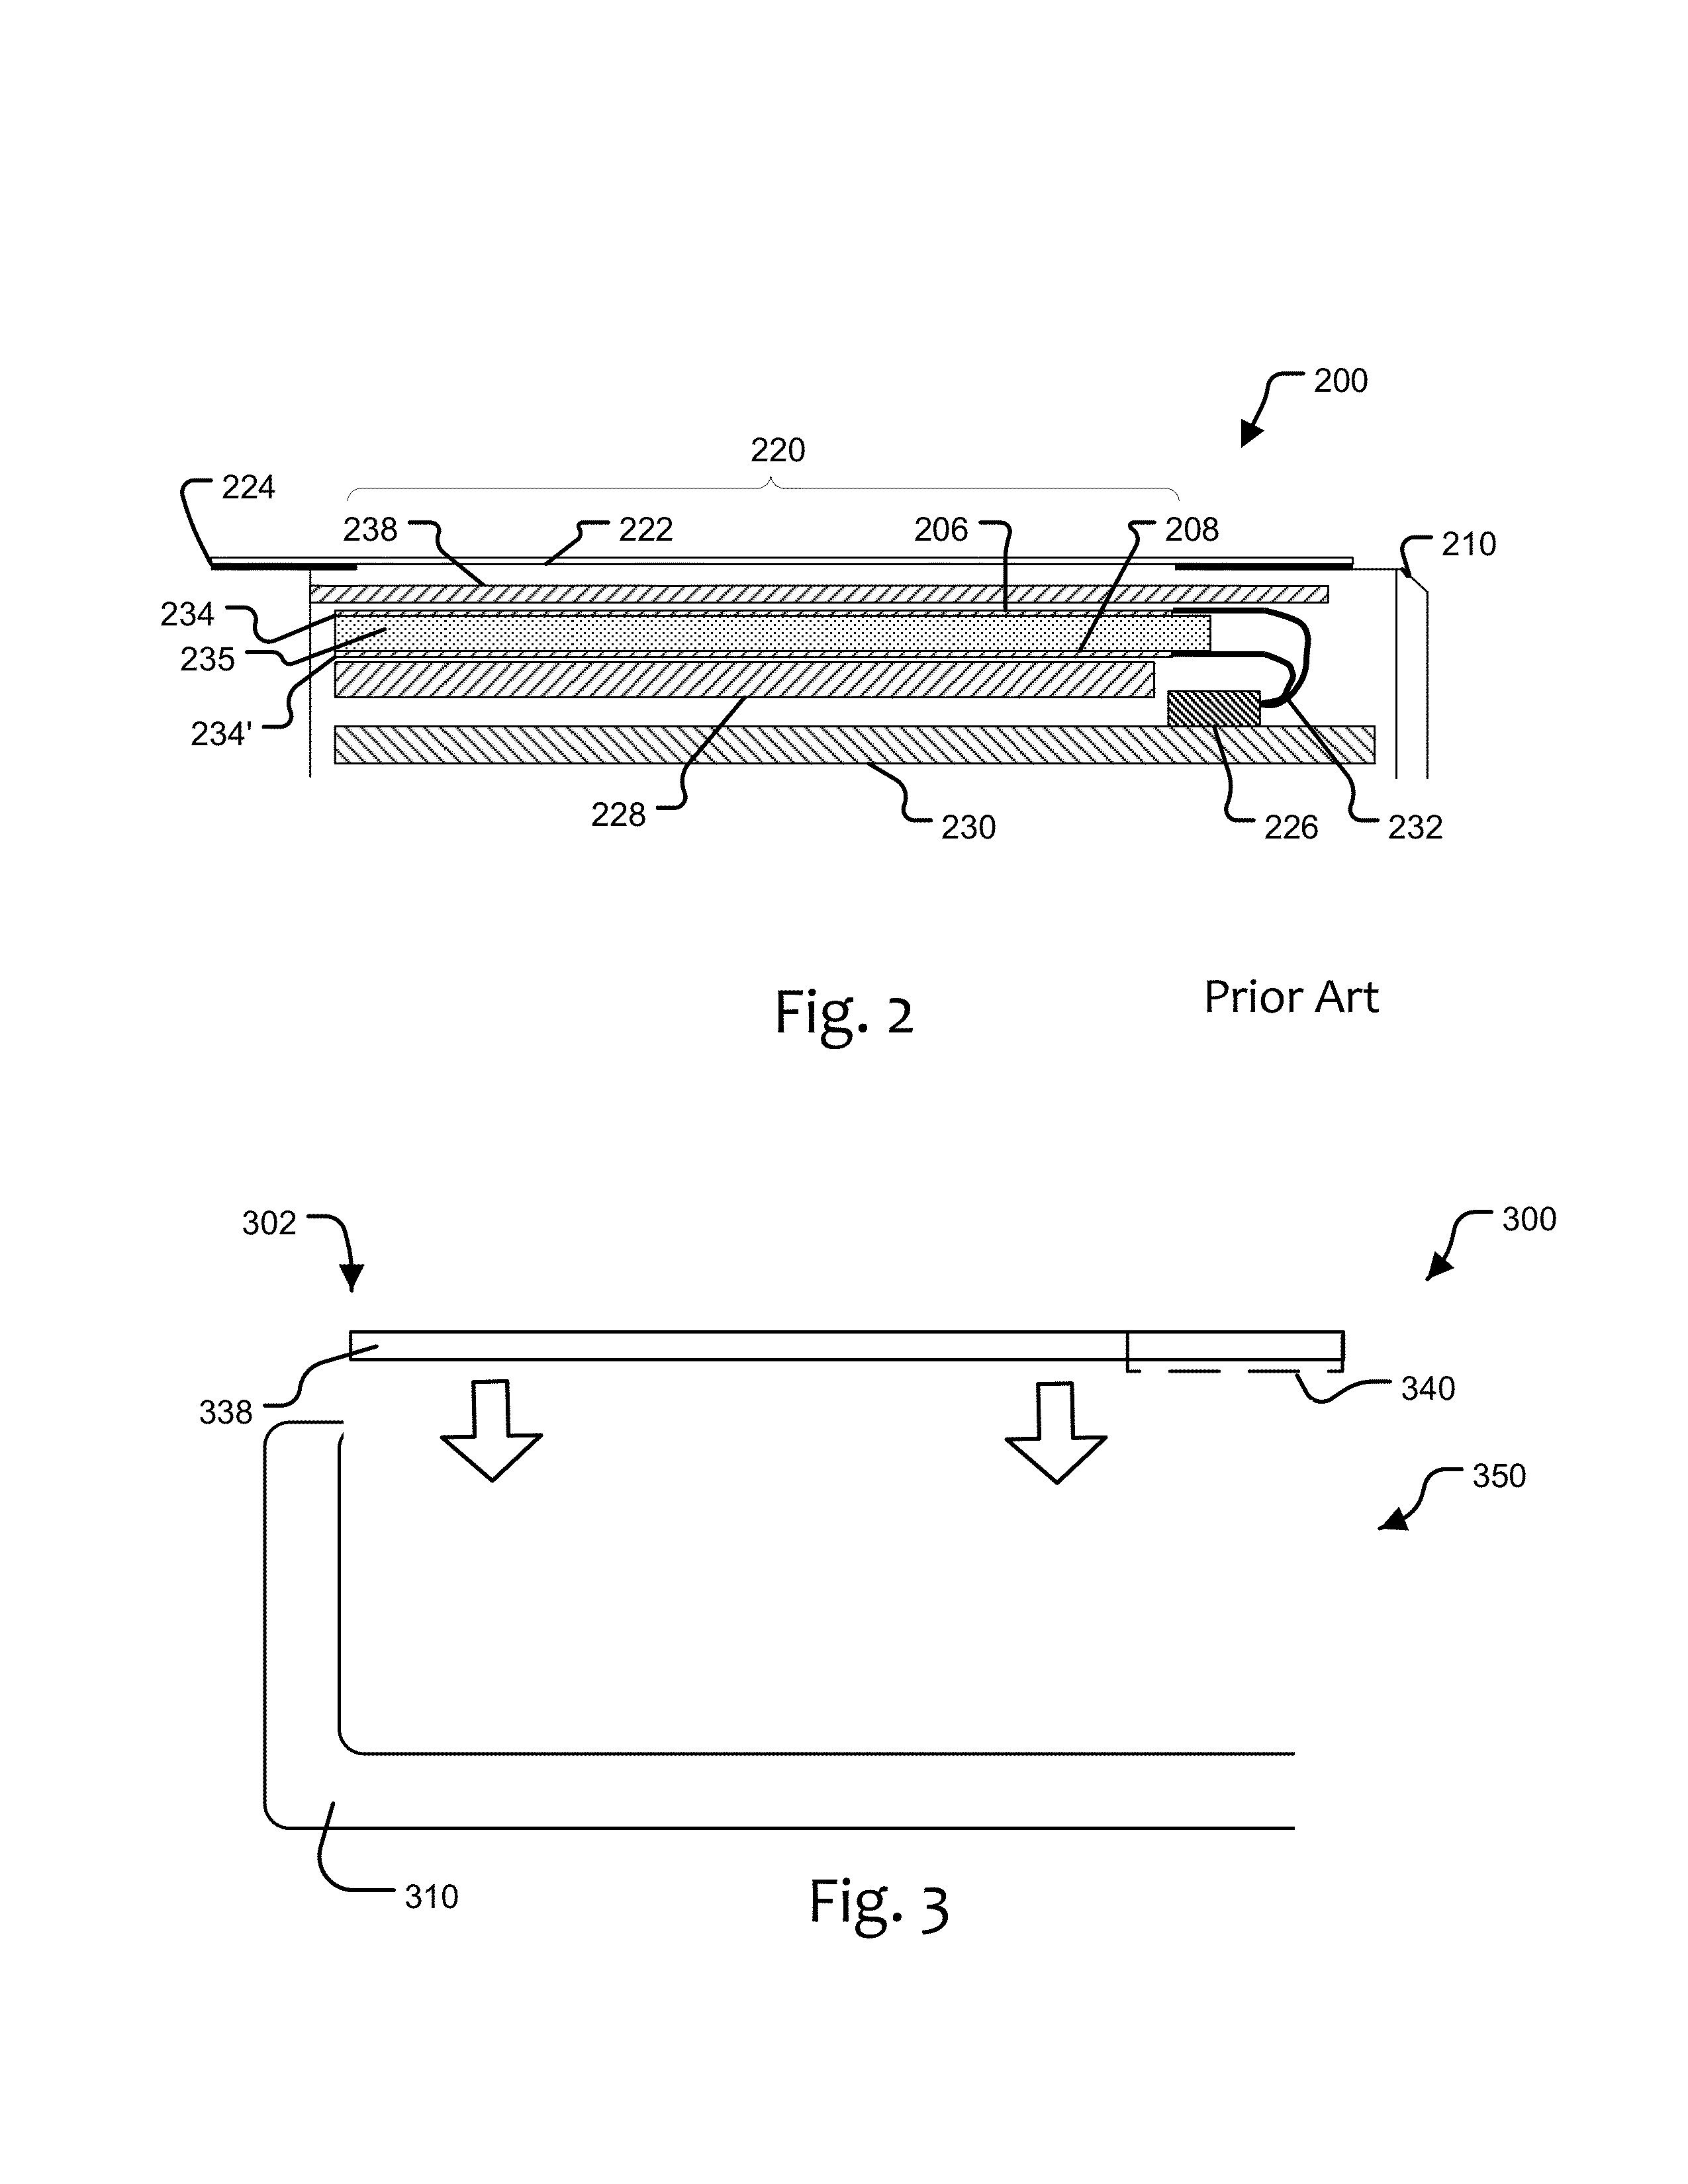 Structures and manufacturing methods for glass covered electronic devices